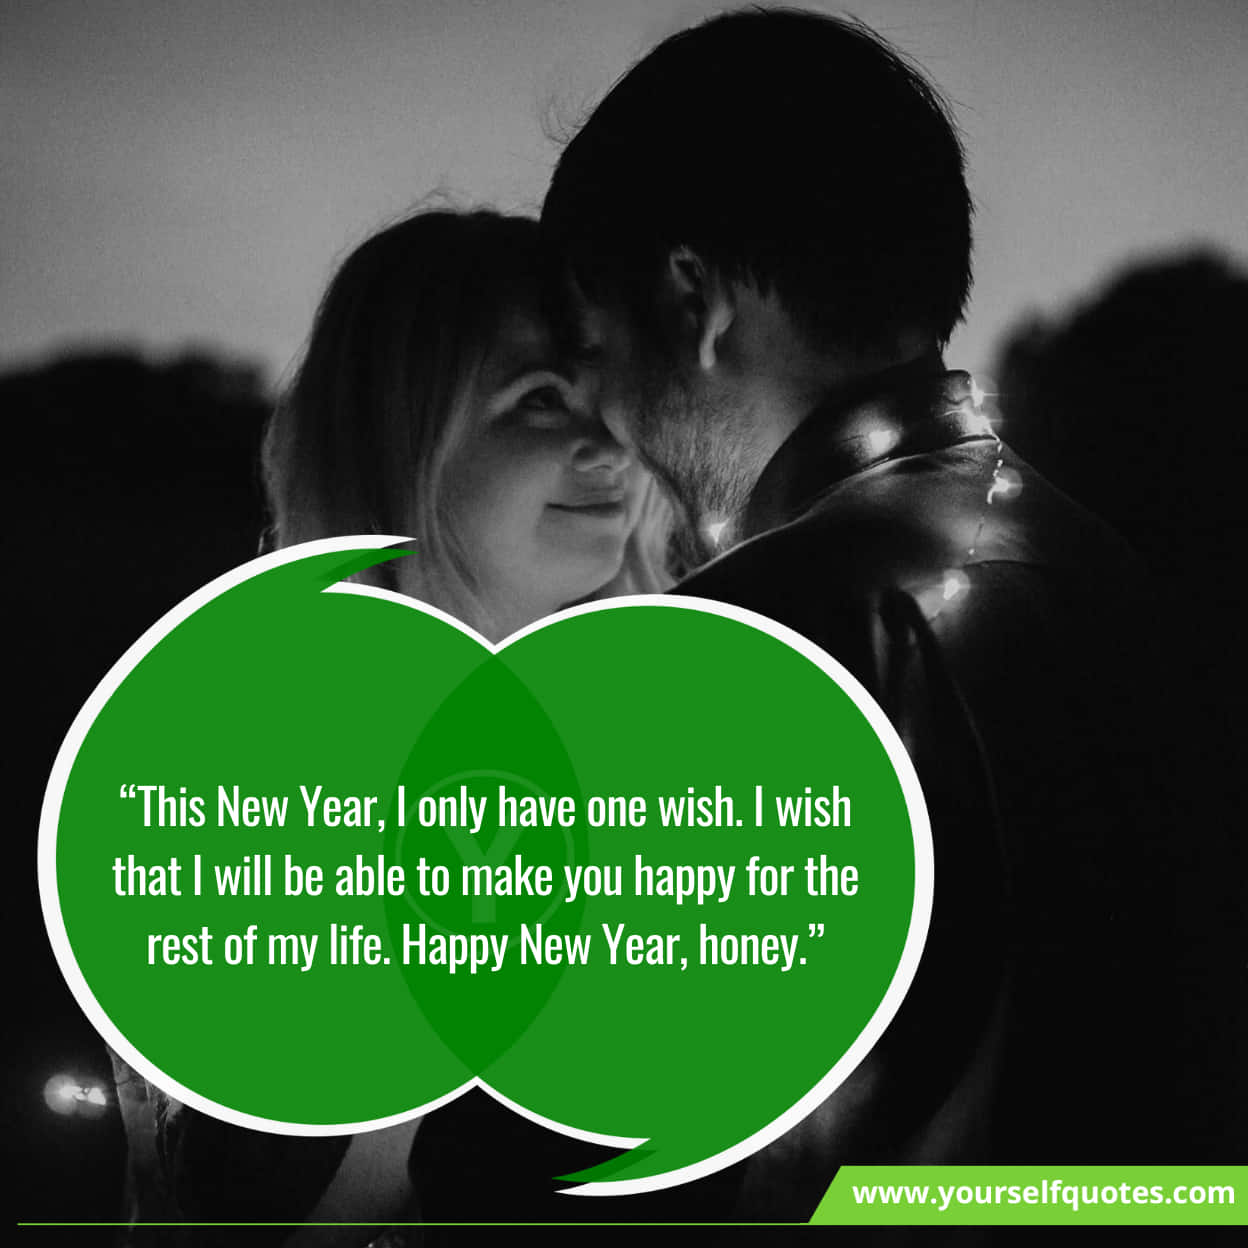 Alluring Romantic New Year Wishes For Her